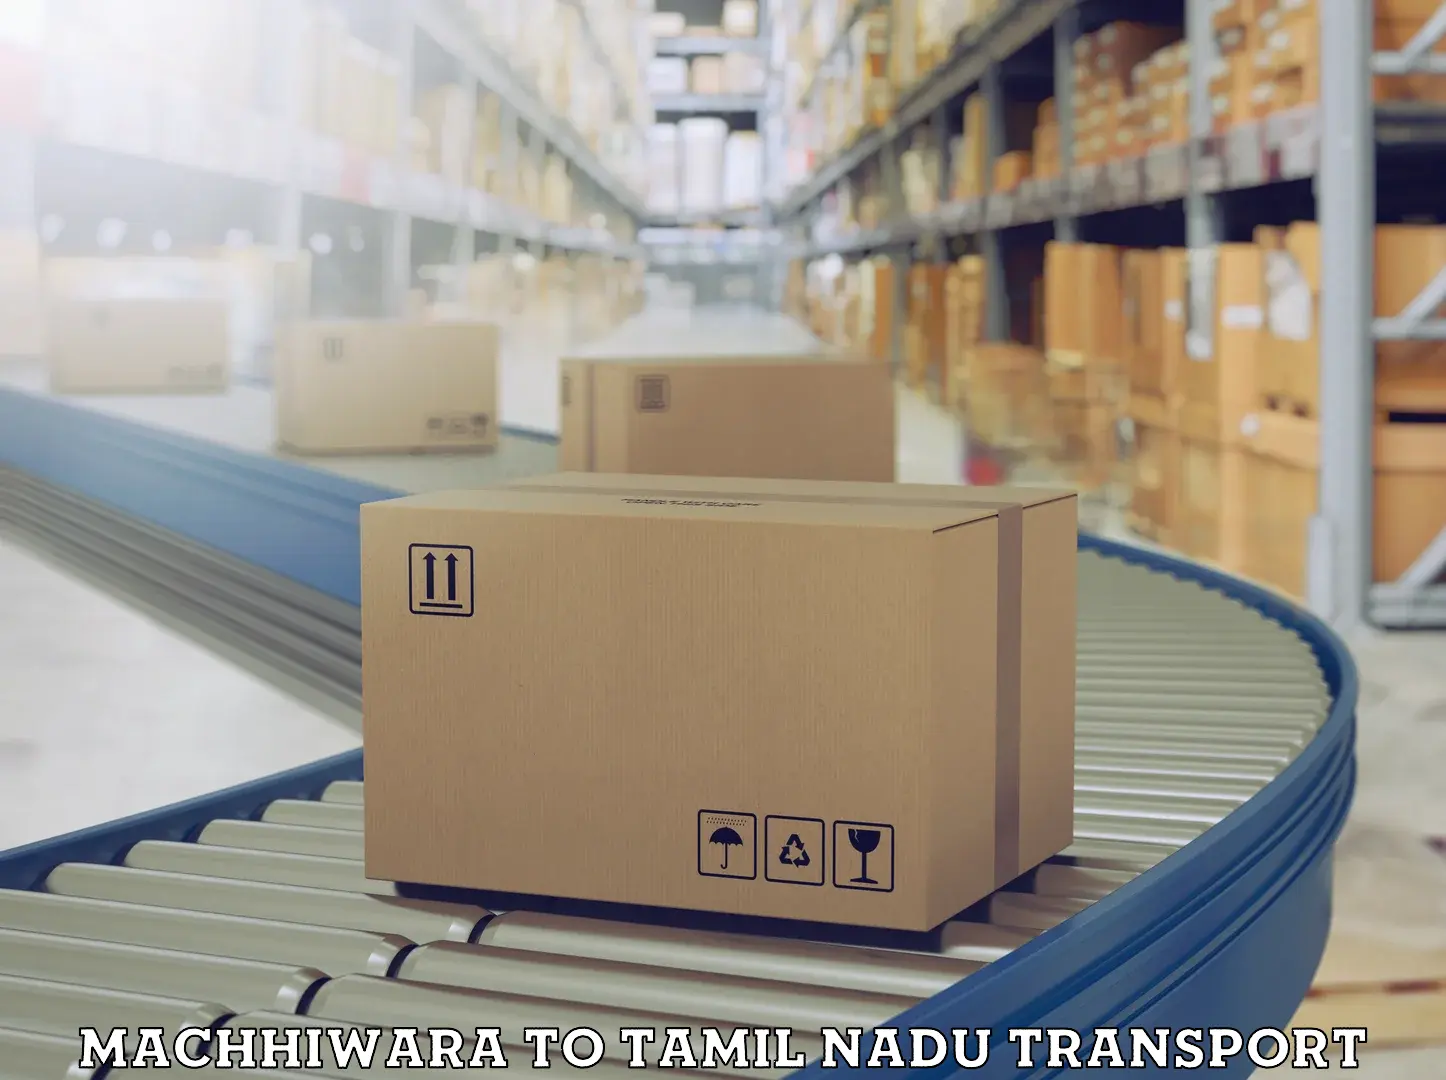 Transport bike from one state to another Machhiwara to Tamil Nadu